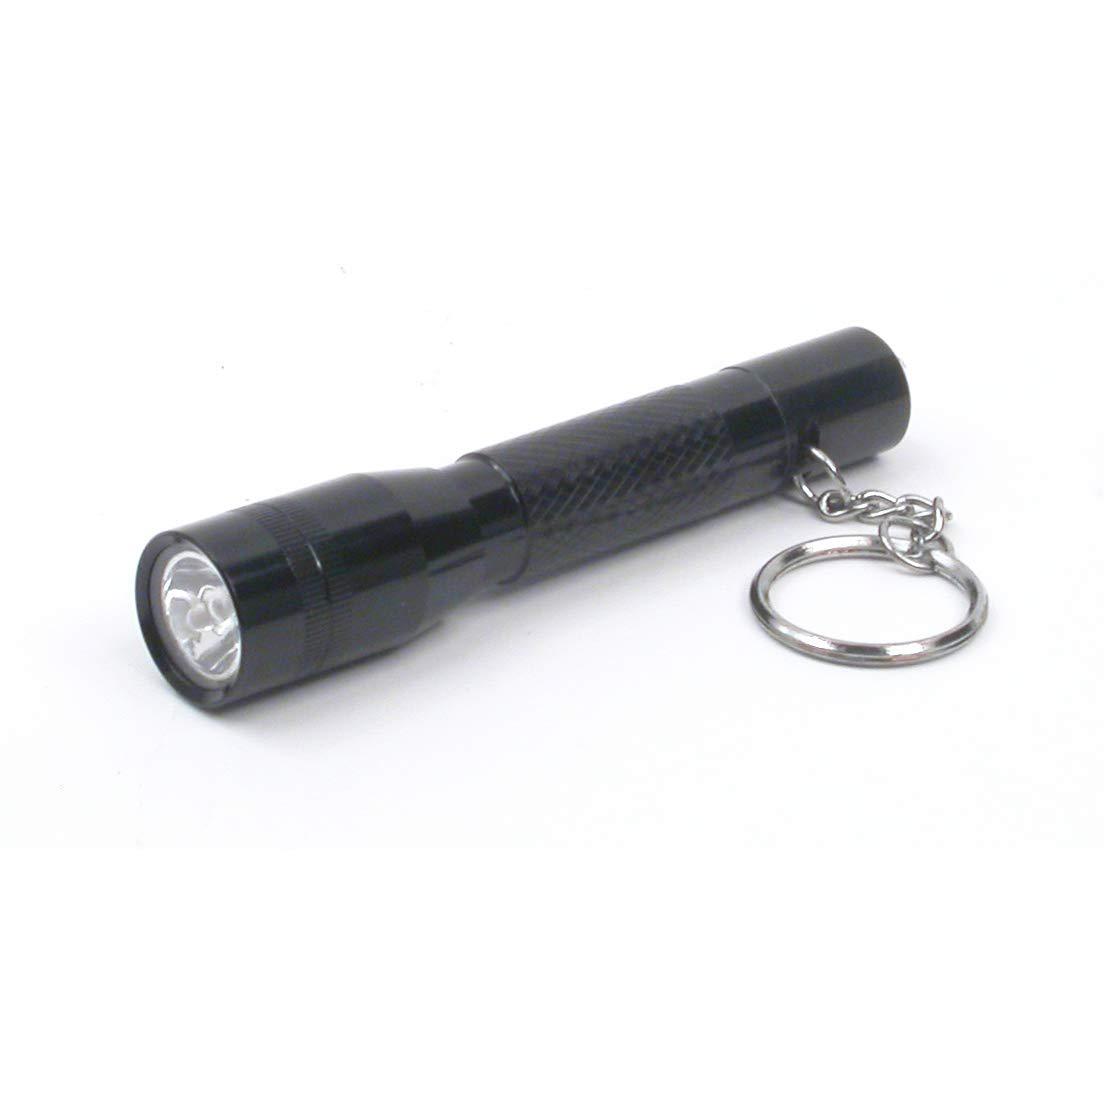 dorcy 10-lumen water resistant led keychain flashlight with tail cap push button switch, assorted colors (46-4001)